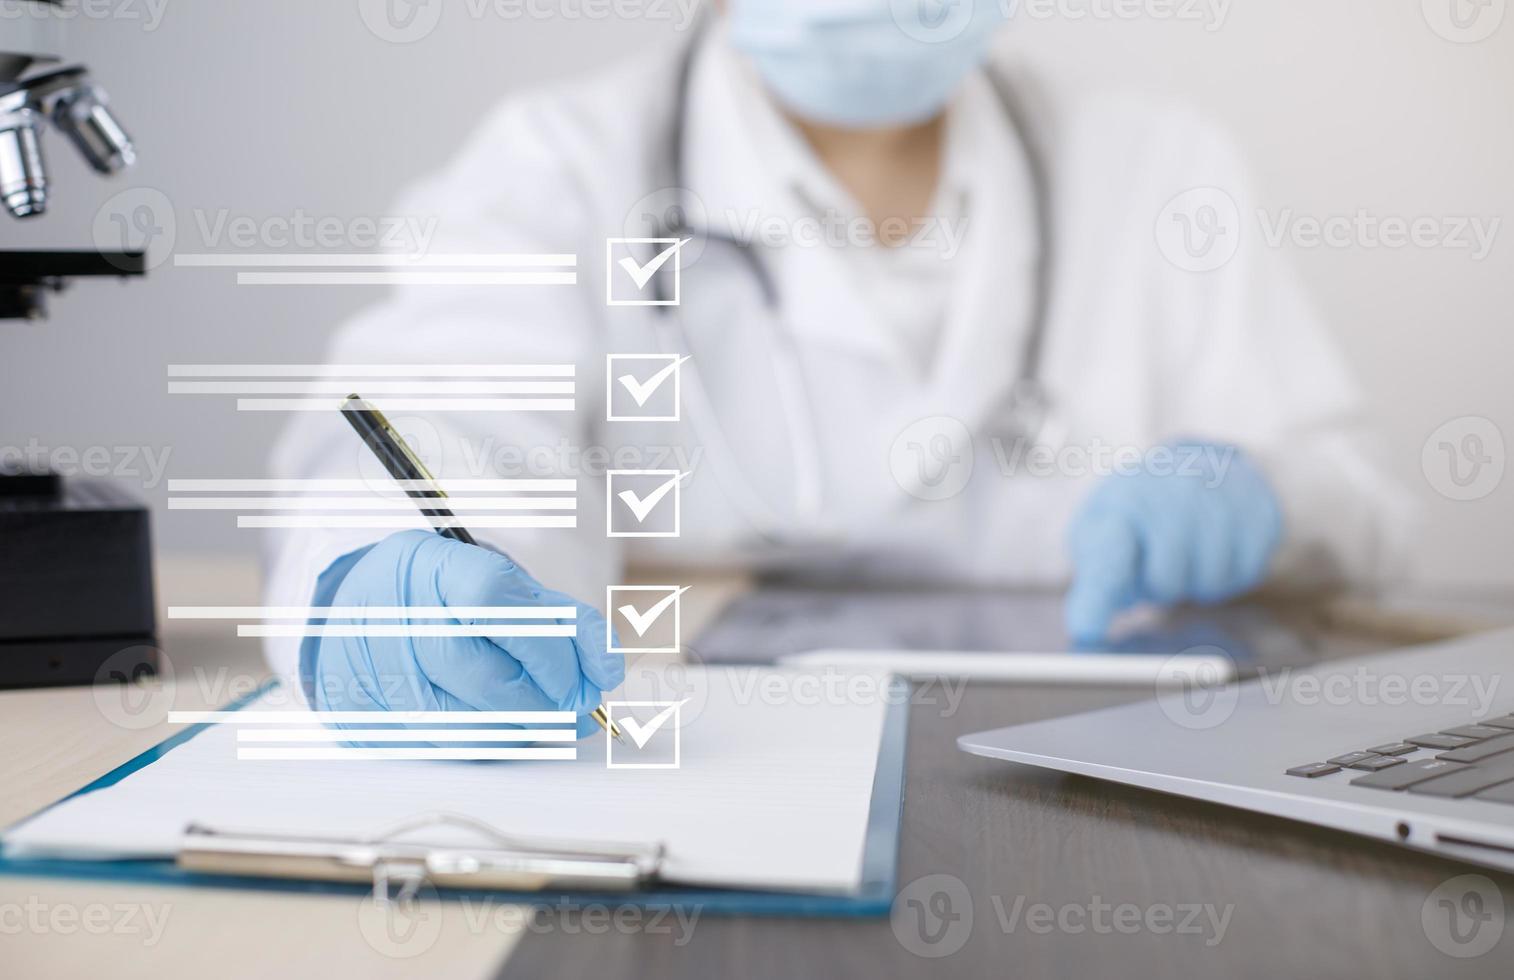 Female Doctor using Taking an assessment, questionnaire, evaluation, online survey, Prescription or signing medical report or medical certificate or health check-up form documents in hospitals. photo